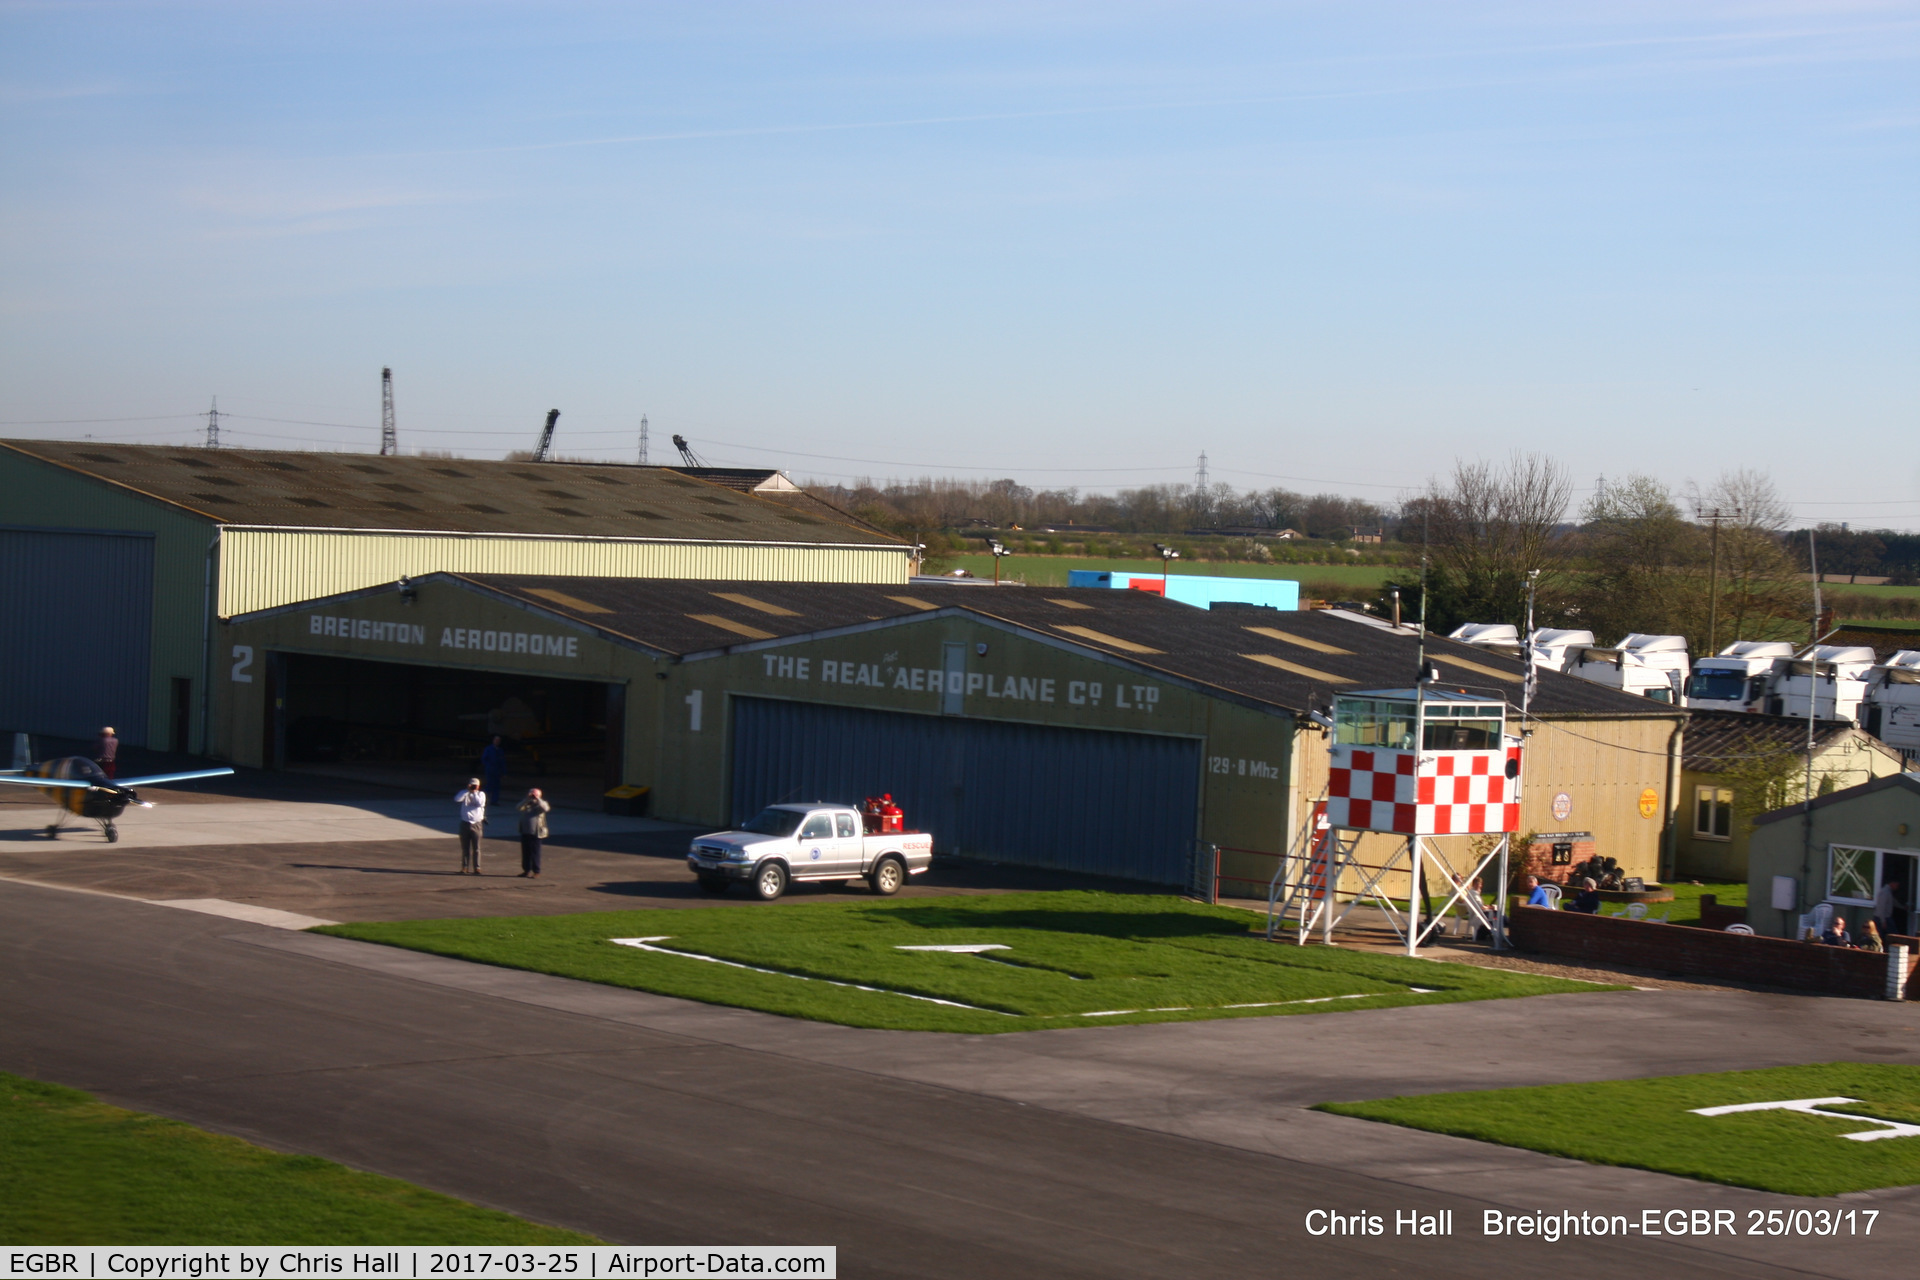 EGBR Airport - departing from Breighton in Piper PA-15 Vagabond G-BRPY